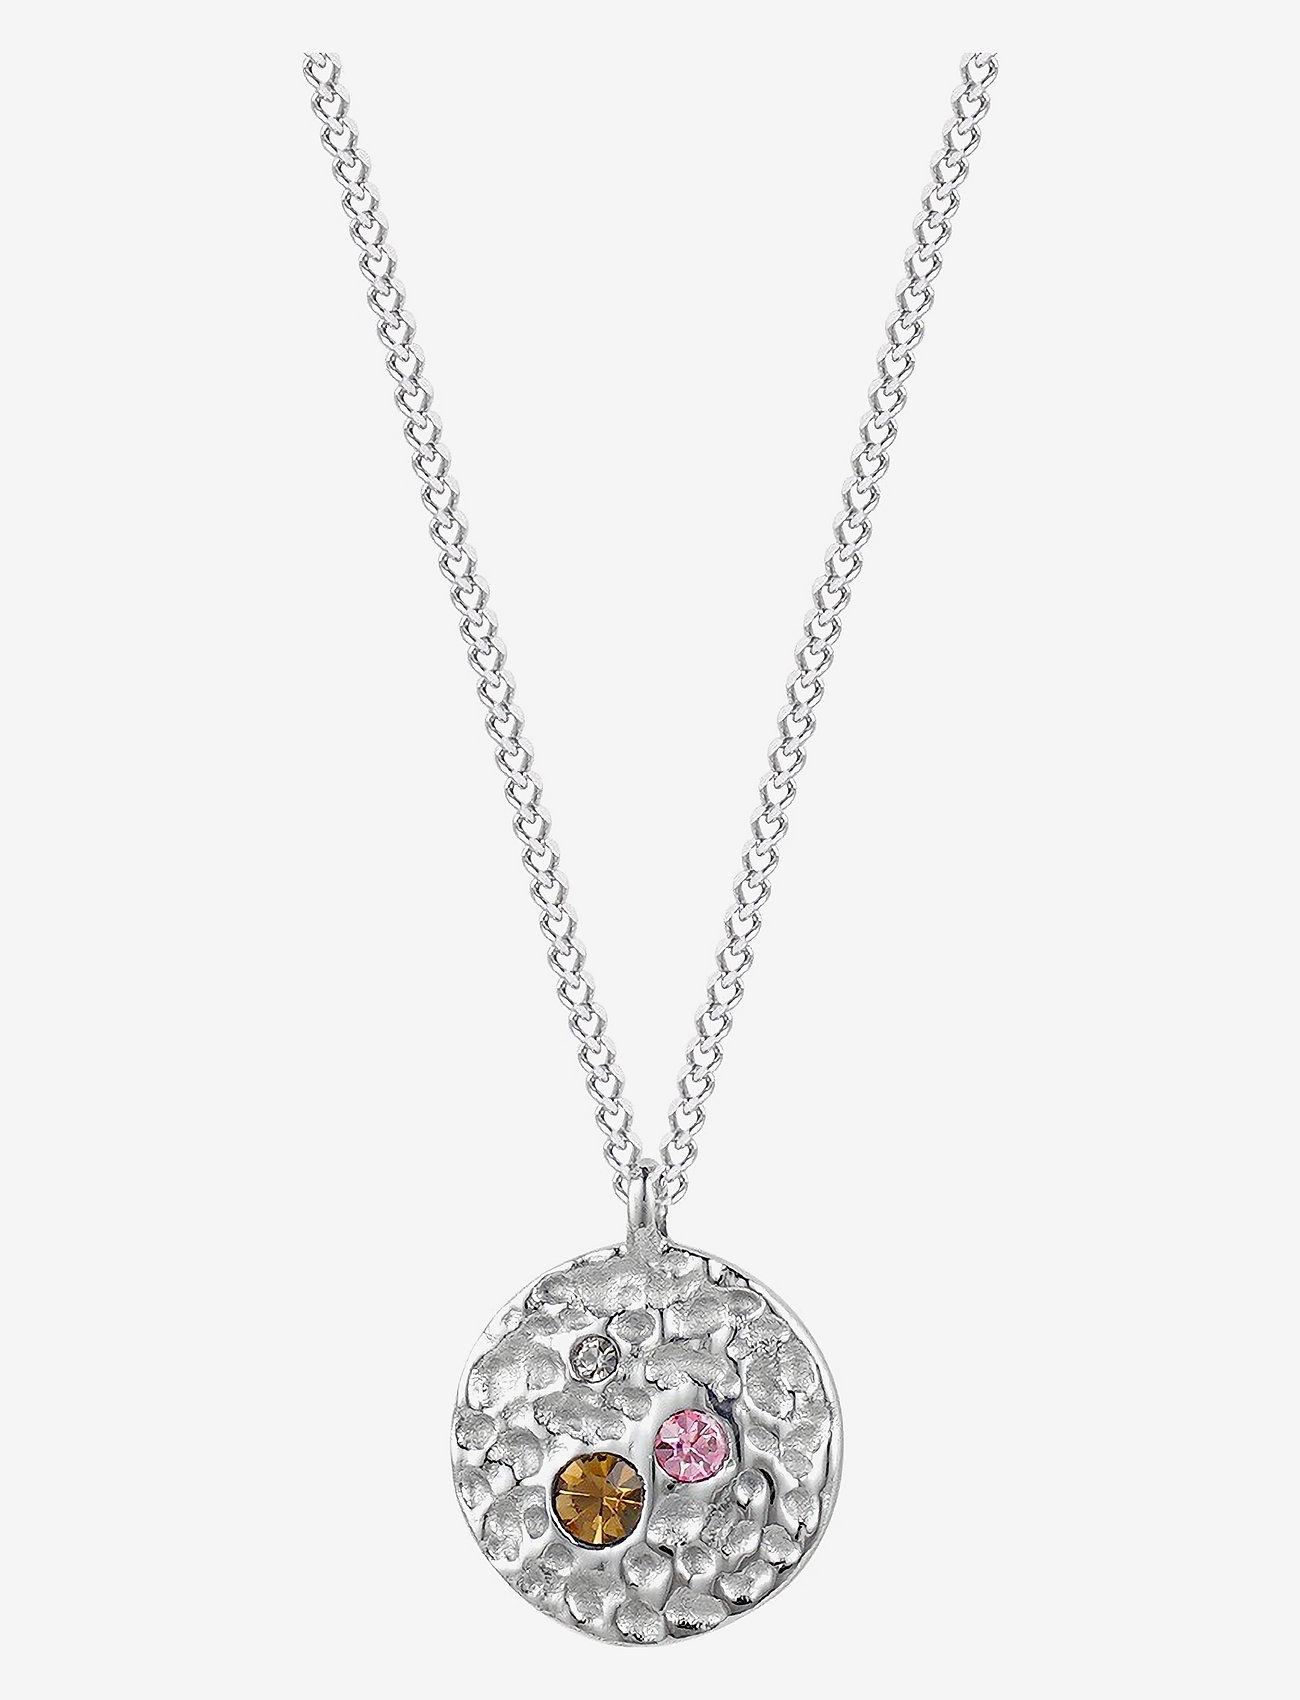 Bud to rose - Ridge Crystal Necklace Gold - festmode zu outlet-preisen - silver - 0